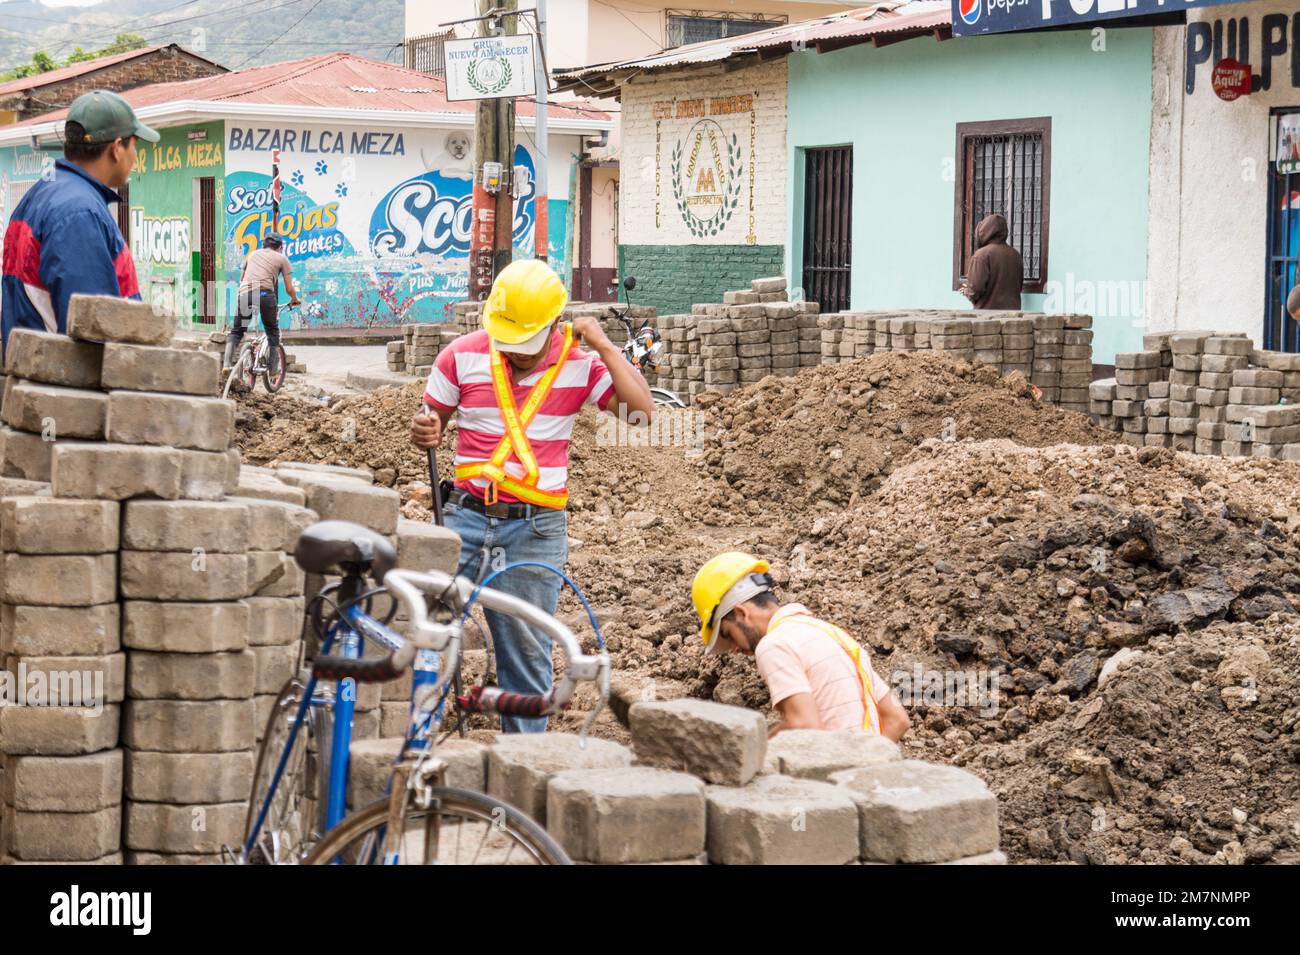 Men who commute by biicycle to job sites work on the Jinotega water system in 2014. Stock Photo